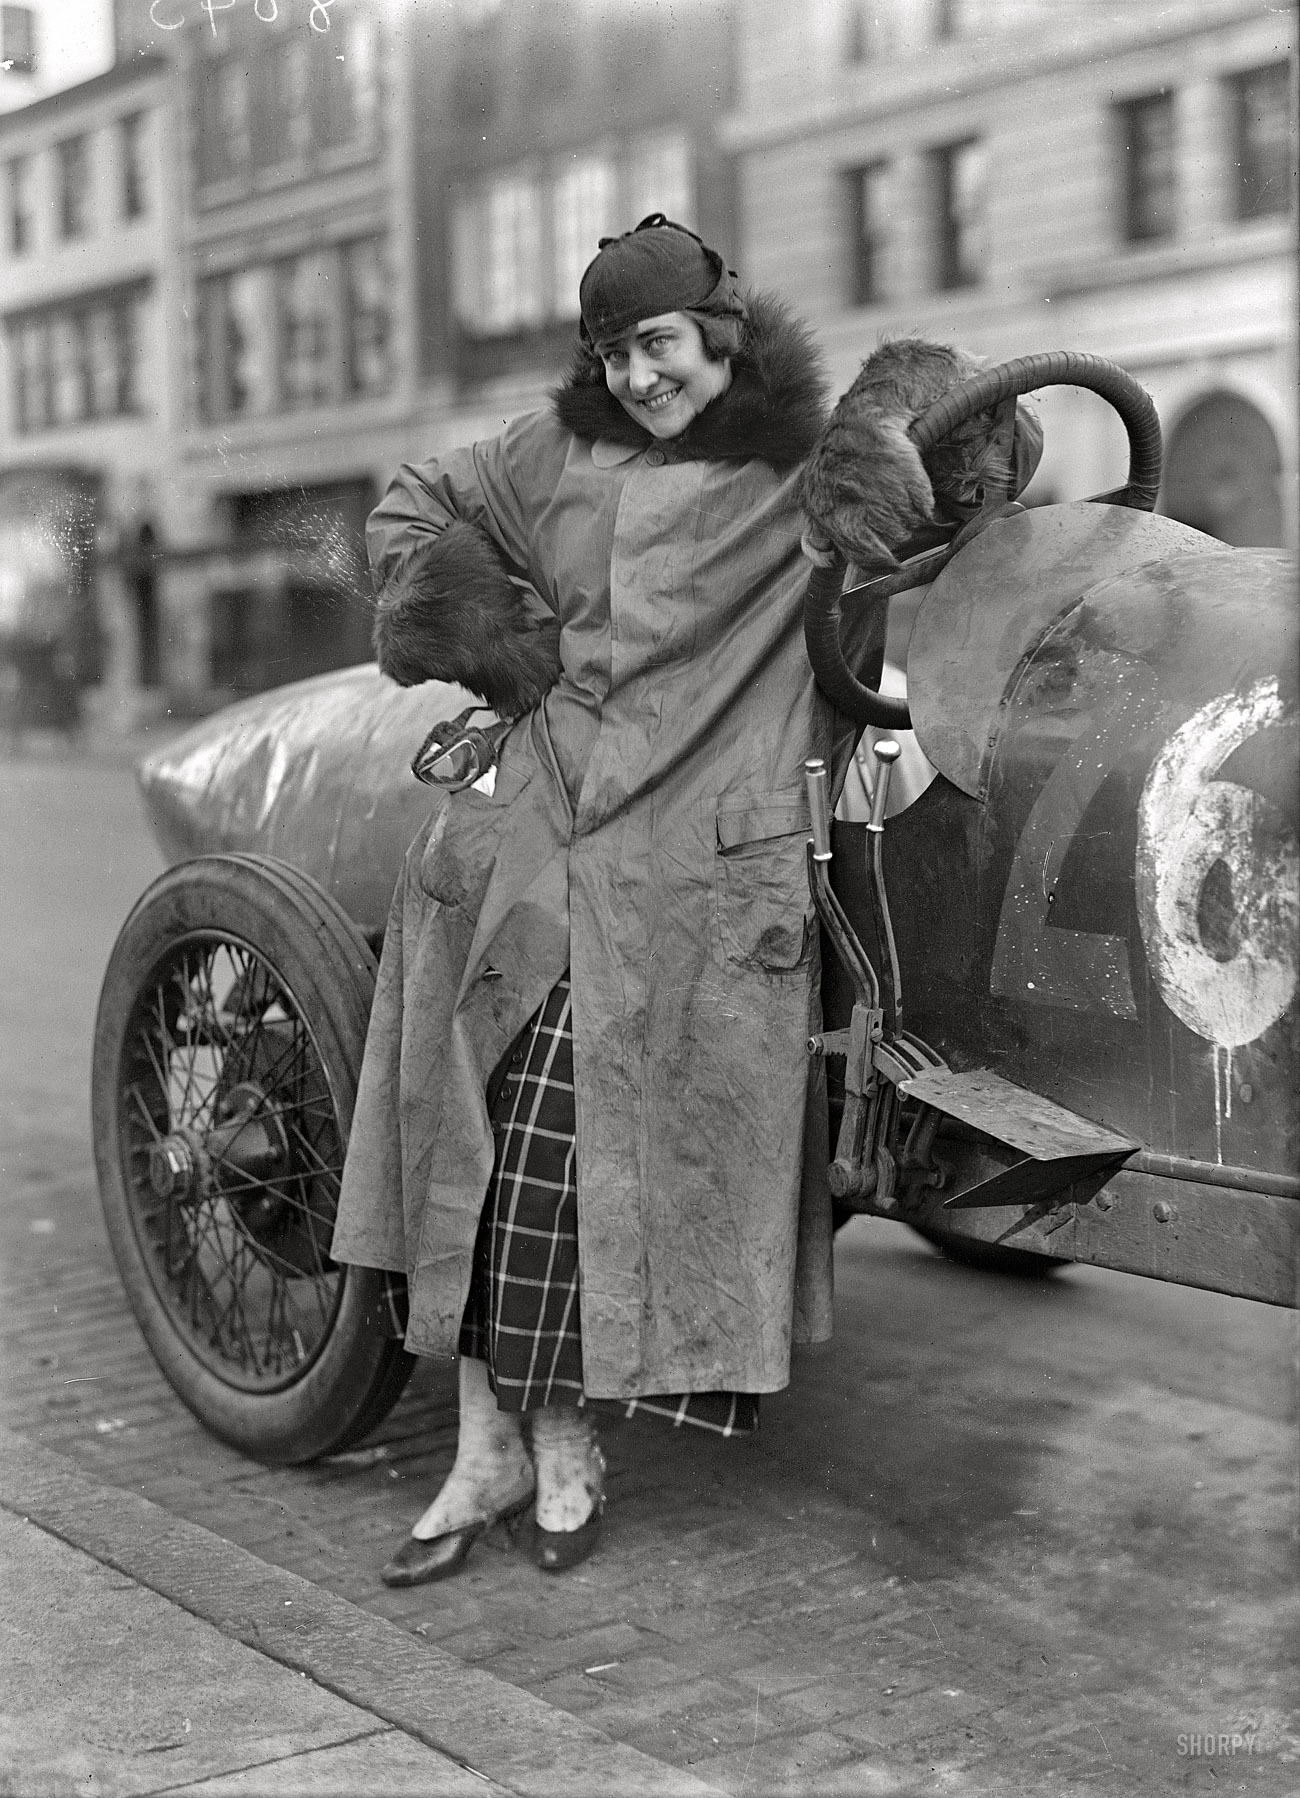 Washington circa 1915. "Women auto racers. Miss Elinor Blevins." Our second visit with the racy actress. For details on the car see the comments under the earlier post. Harris & Ewing Collection glass negative. View full size.